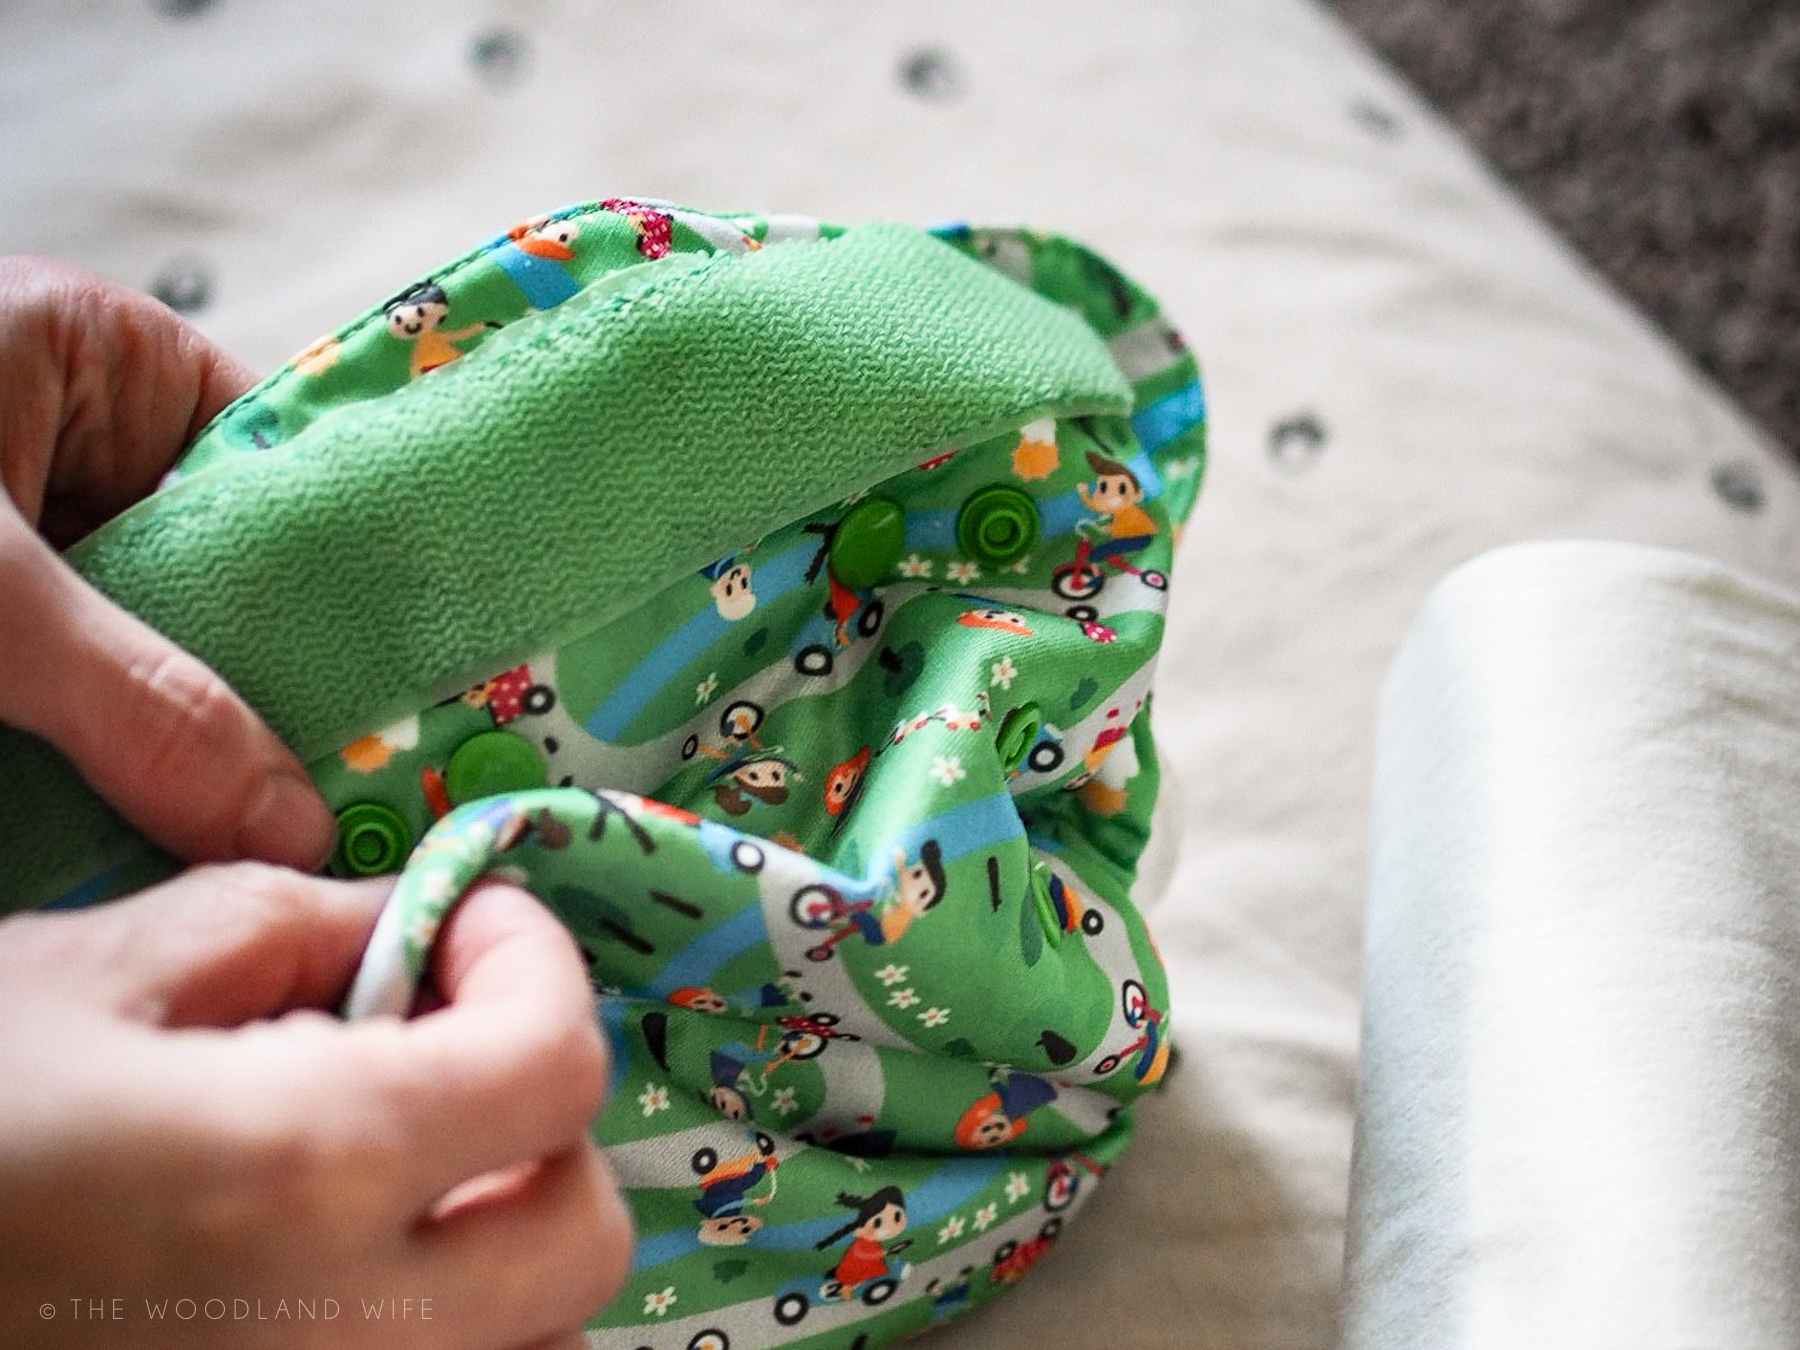 The Woodland Wife 2019 - Reuseable Cloth Nappies - TotsBots